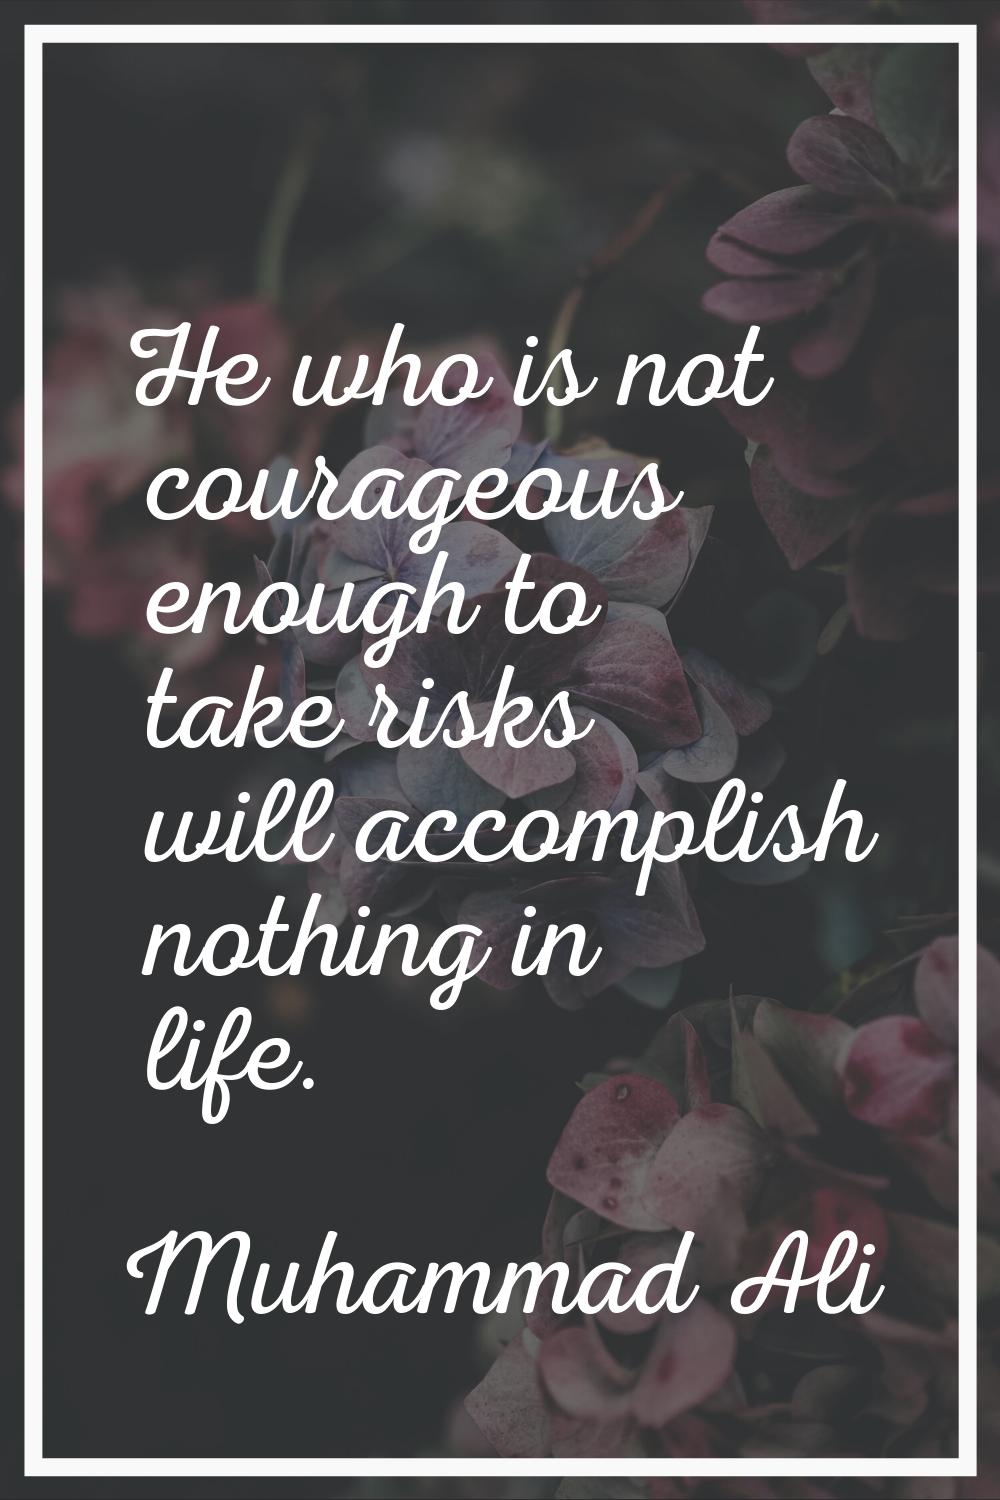 He who is not courageous enough to take risks will accomplish nothing in life.